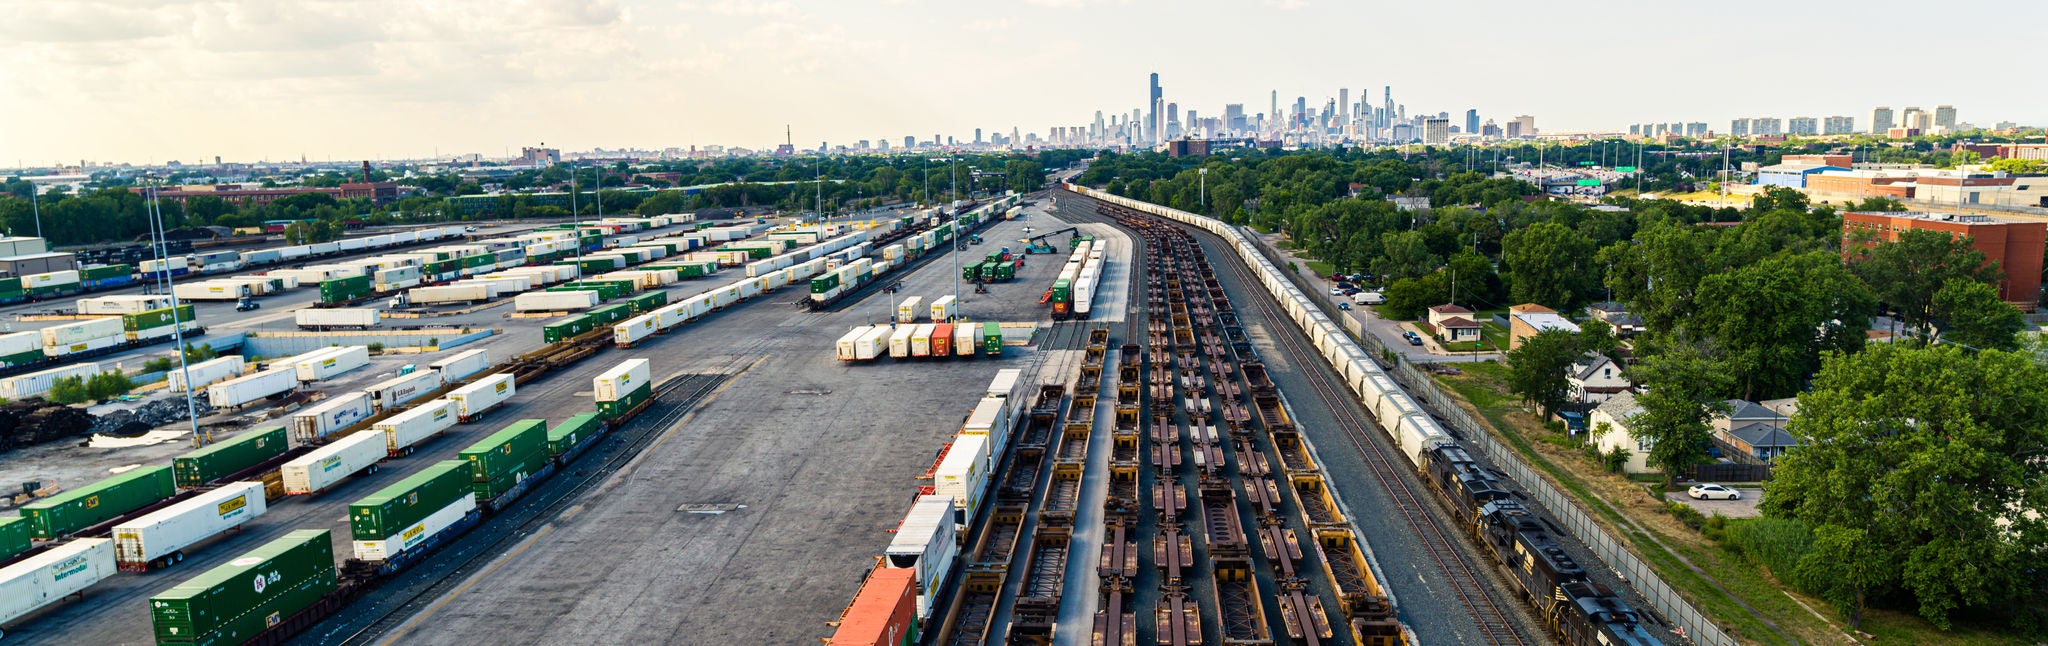 Aerial shot of train yard with 20 or more trains waiting to ship metals by rail